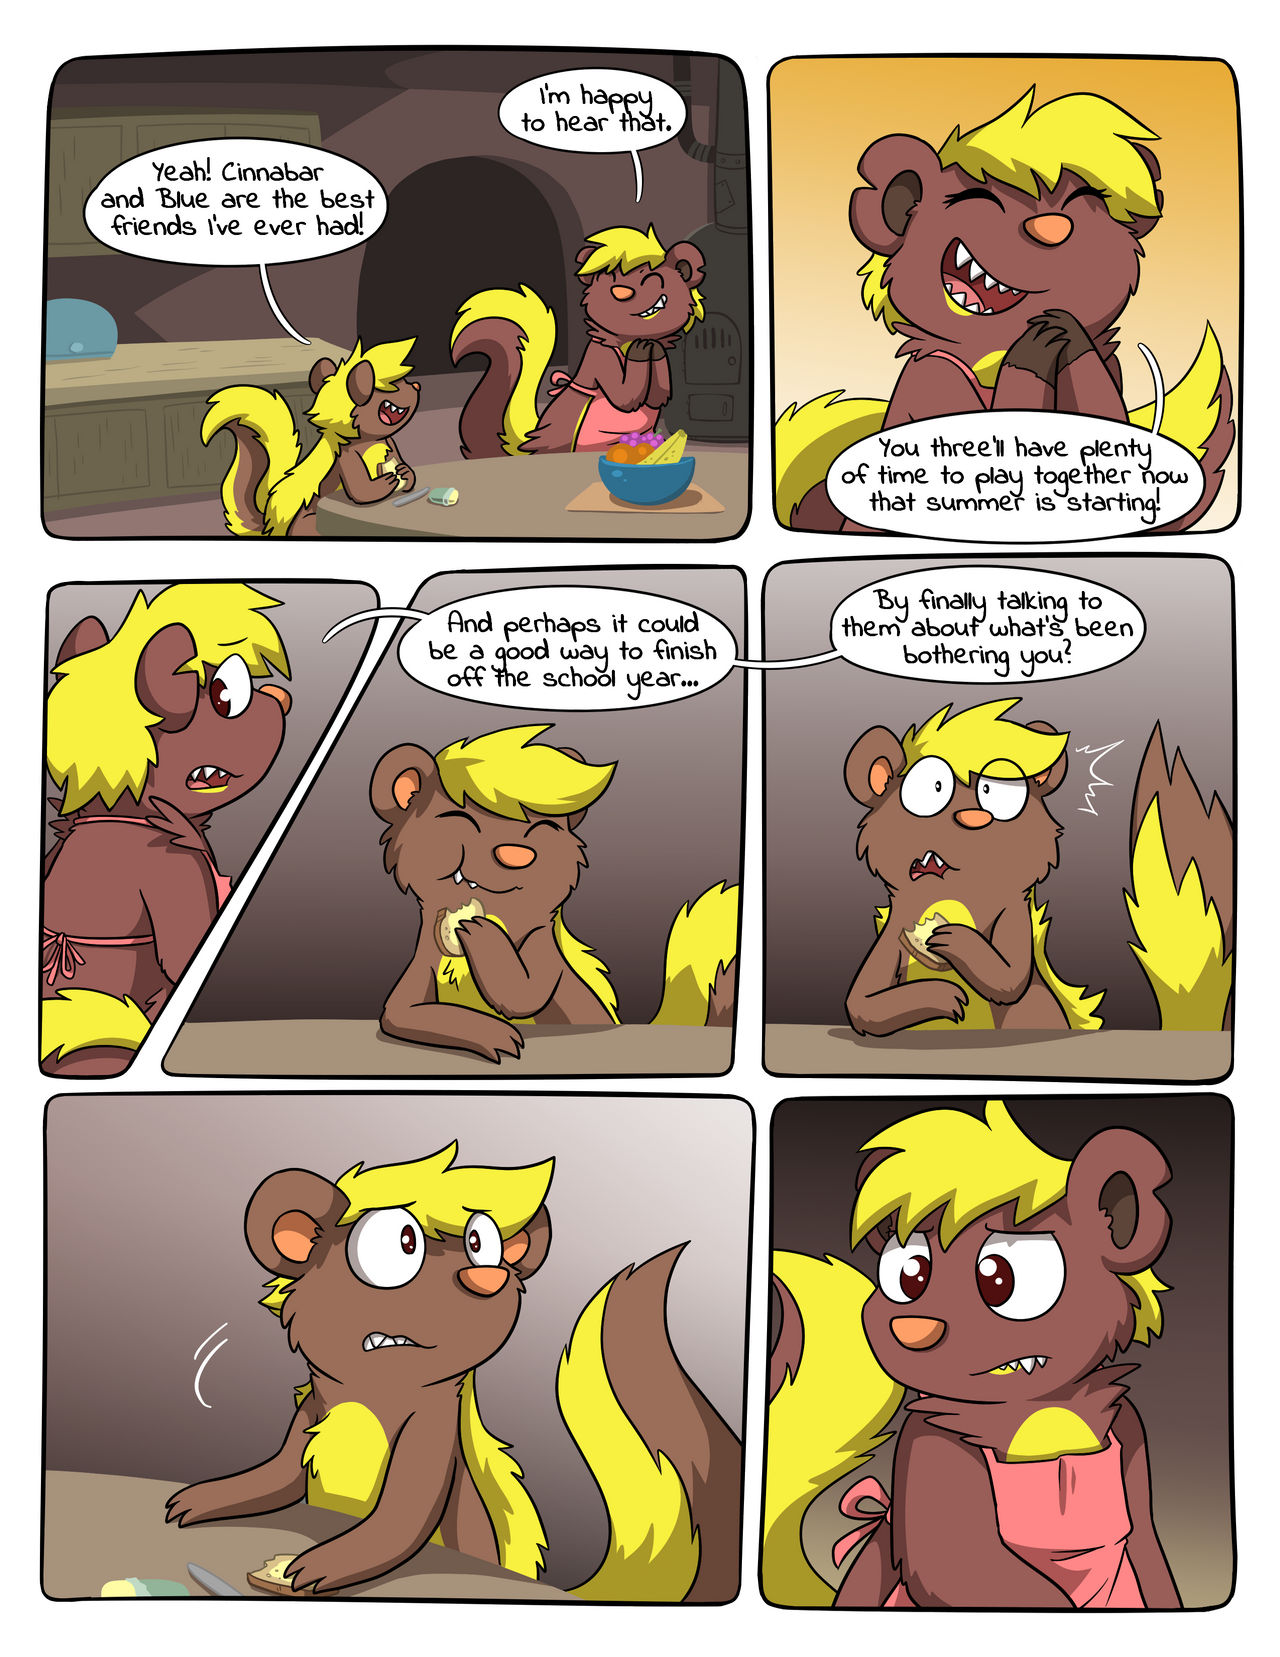 little_lapses__chapter_1__page_9_by_saltnpepperbunny_deoh8g6-fullview.jpg